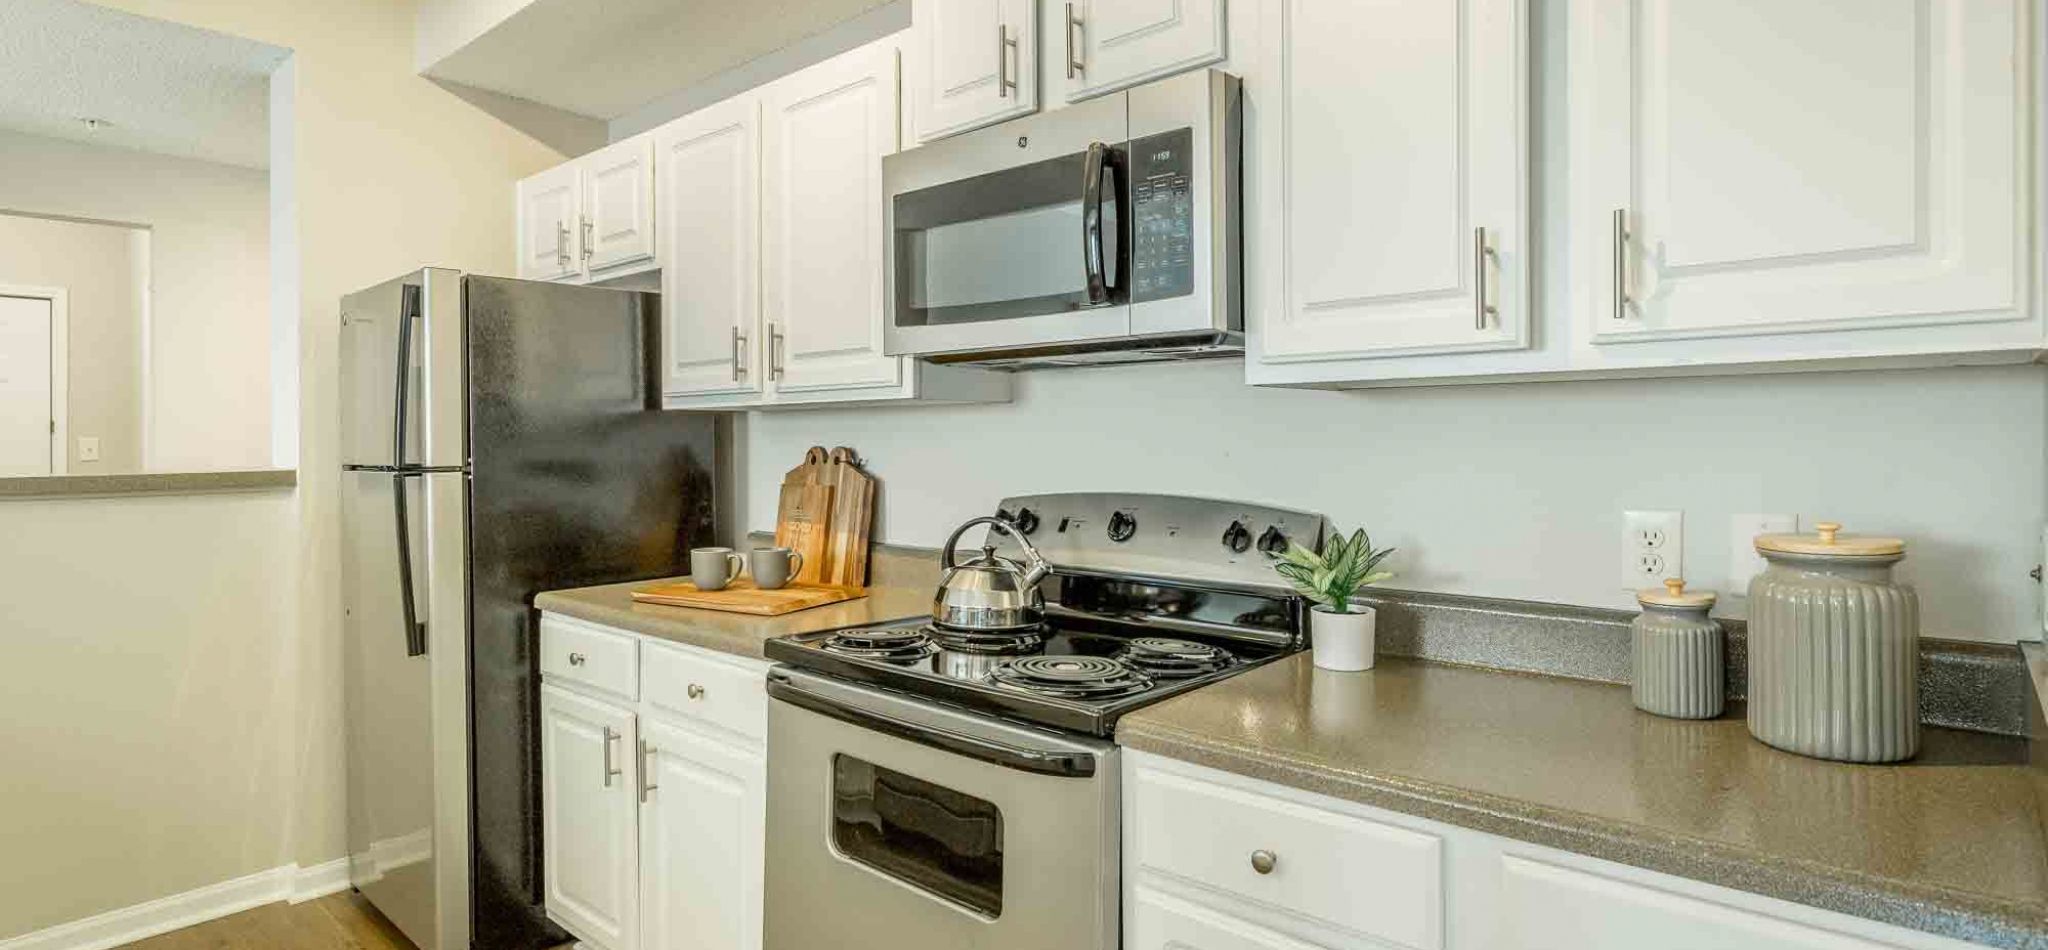 Hawthorne at Lake Heather beautiful apartment kitchen with stainless steel appliances and ample cabinet space.